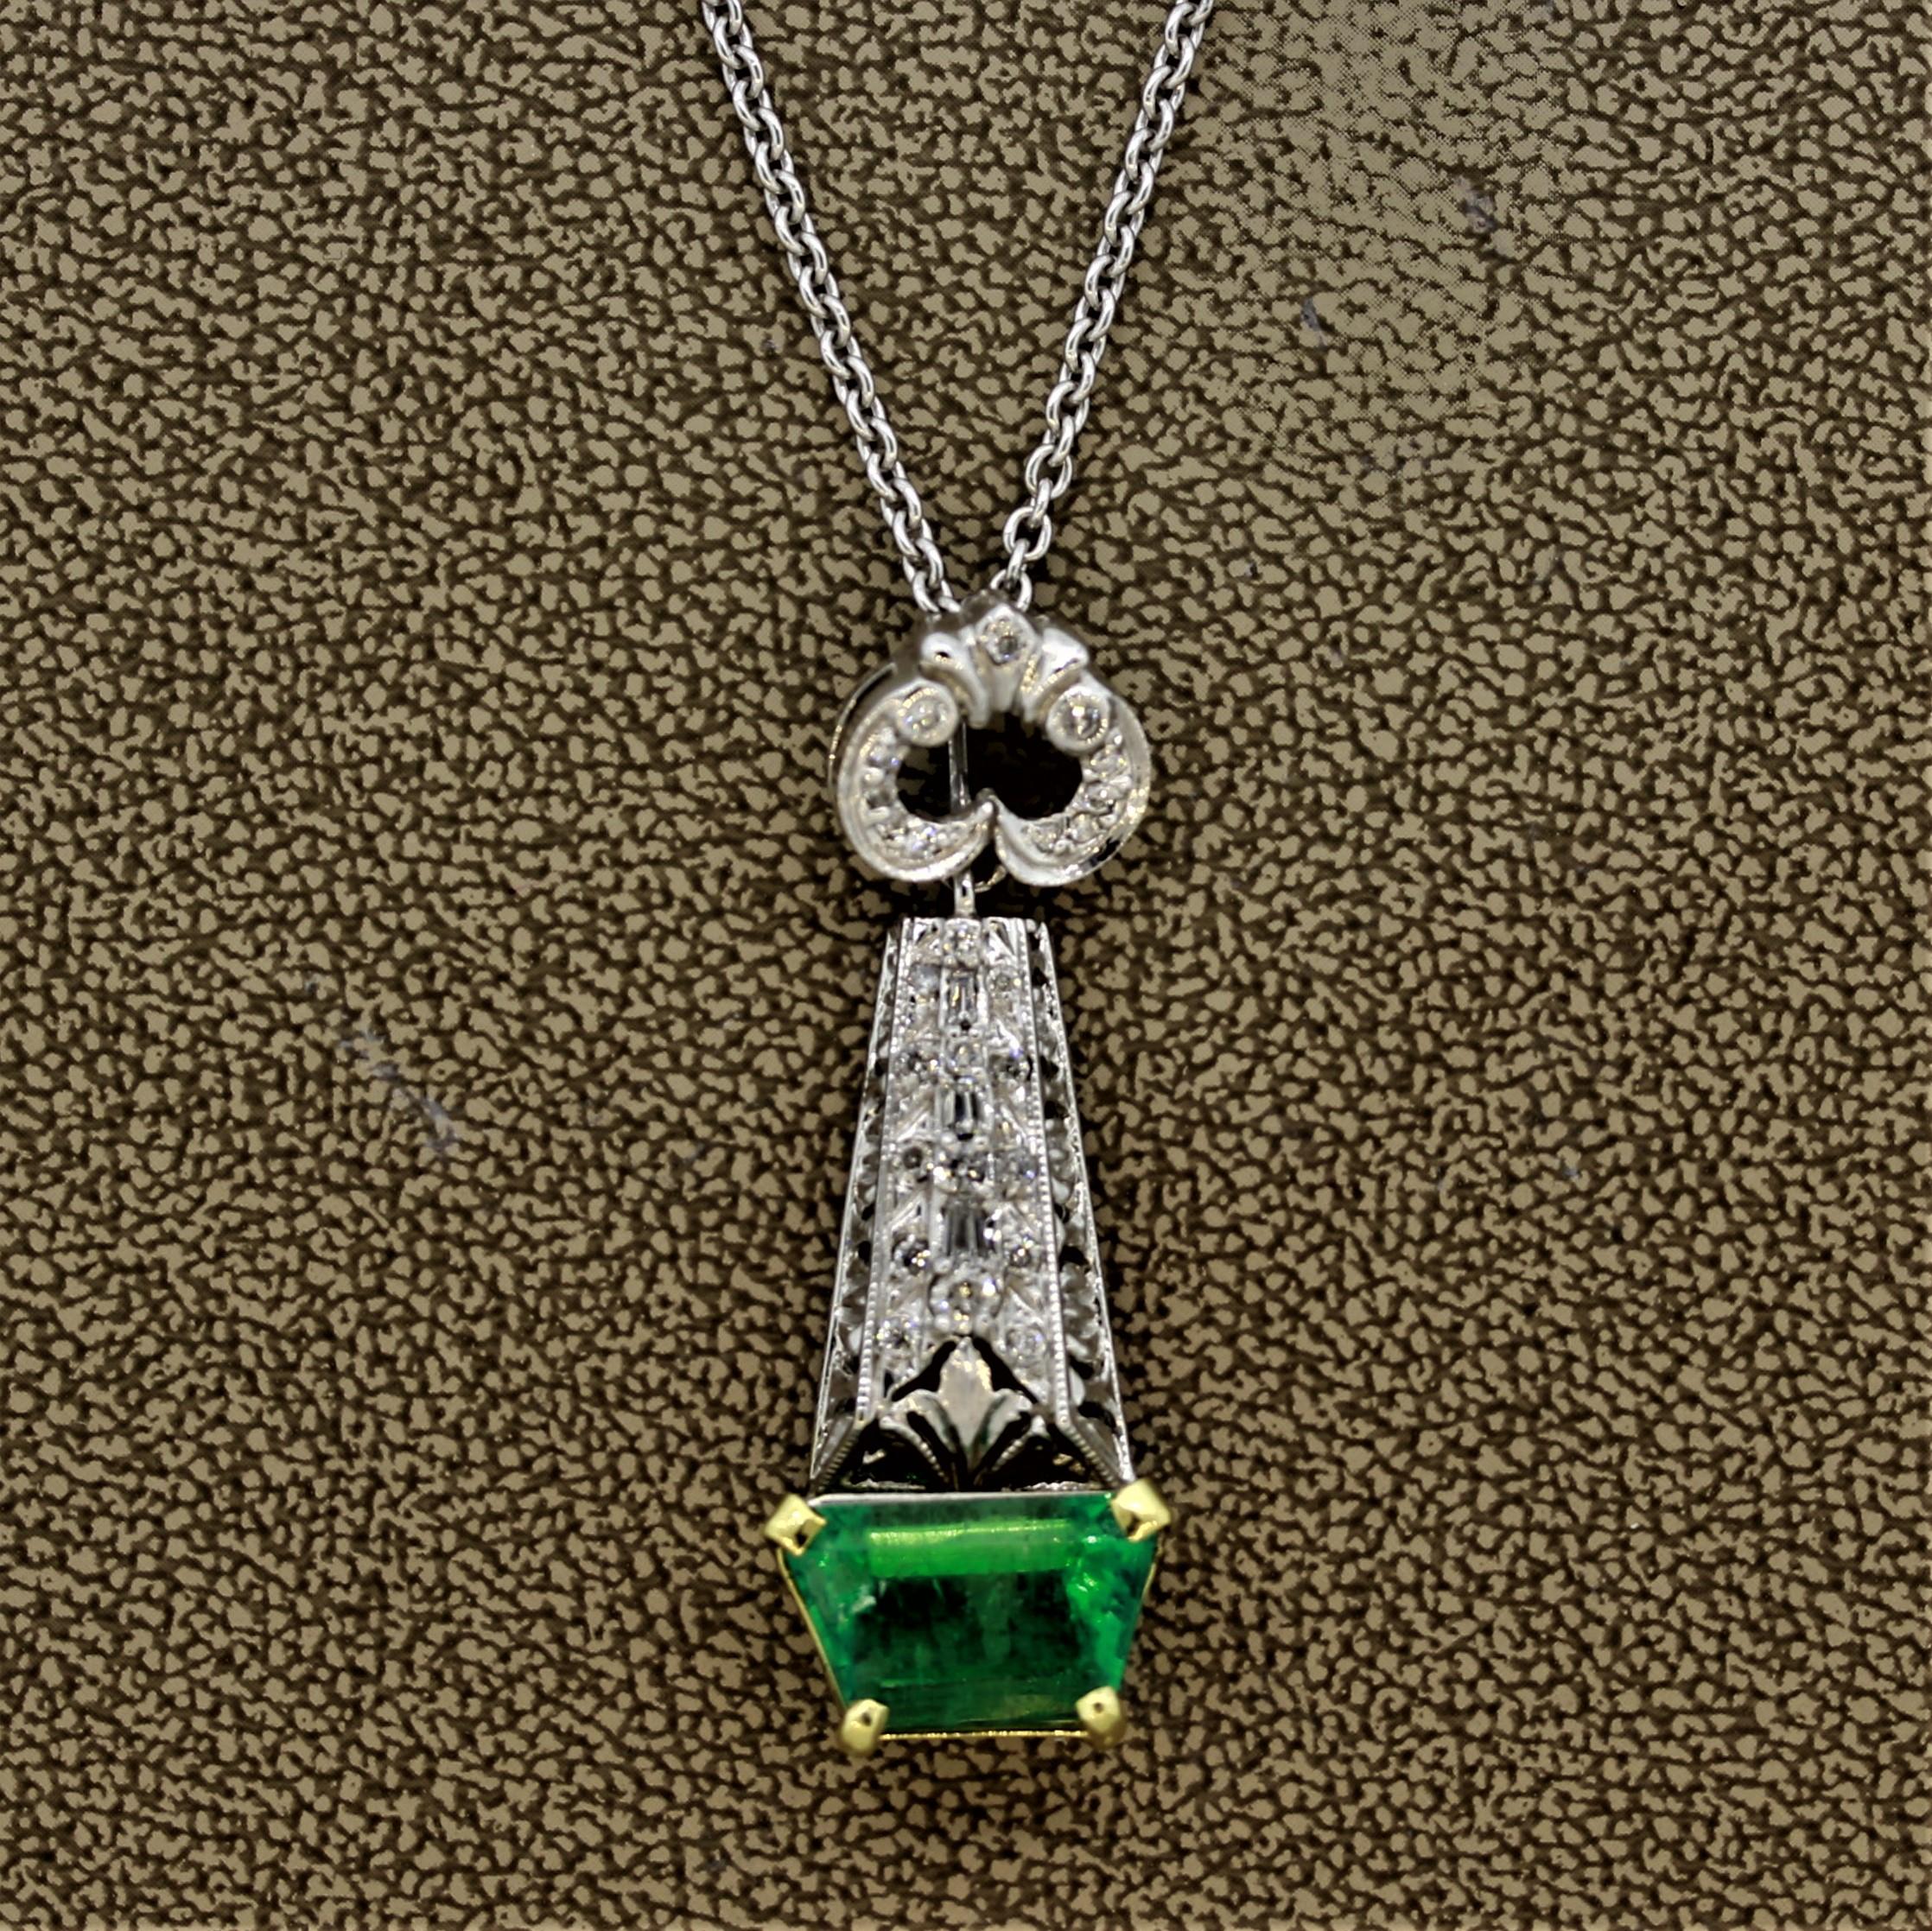 A unique pendant with a uniquely shaped emerald! The emerald weighs 3.73 carats and is cut as a trapezoid. It has a sweet green color typical of Colombian emeralds. It is accented by 0.40 carats of diamonds set above the emerald. Made in 18k